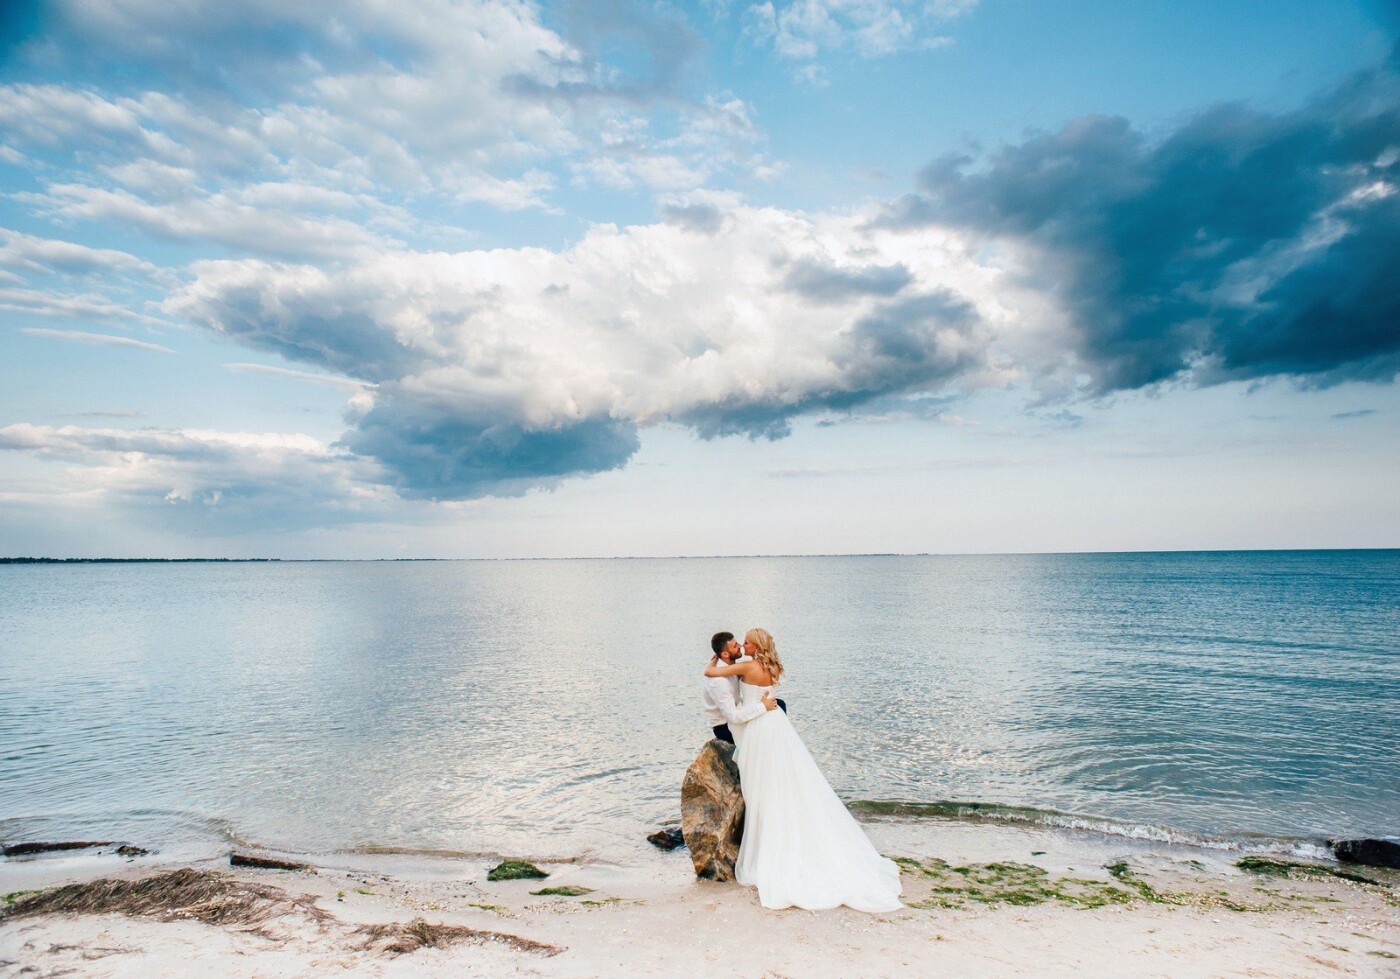 Azov Sea was especially romantic in the evening. Nature has created the perfect landscape for this beautiful couple! The bride Irina so tenderly embraces groom Eugene, as a beautiful sky reflected in the mirror of water.